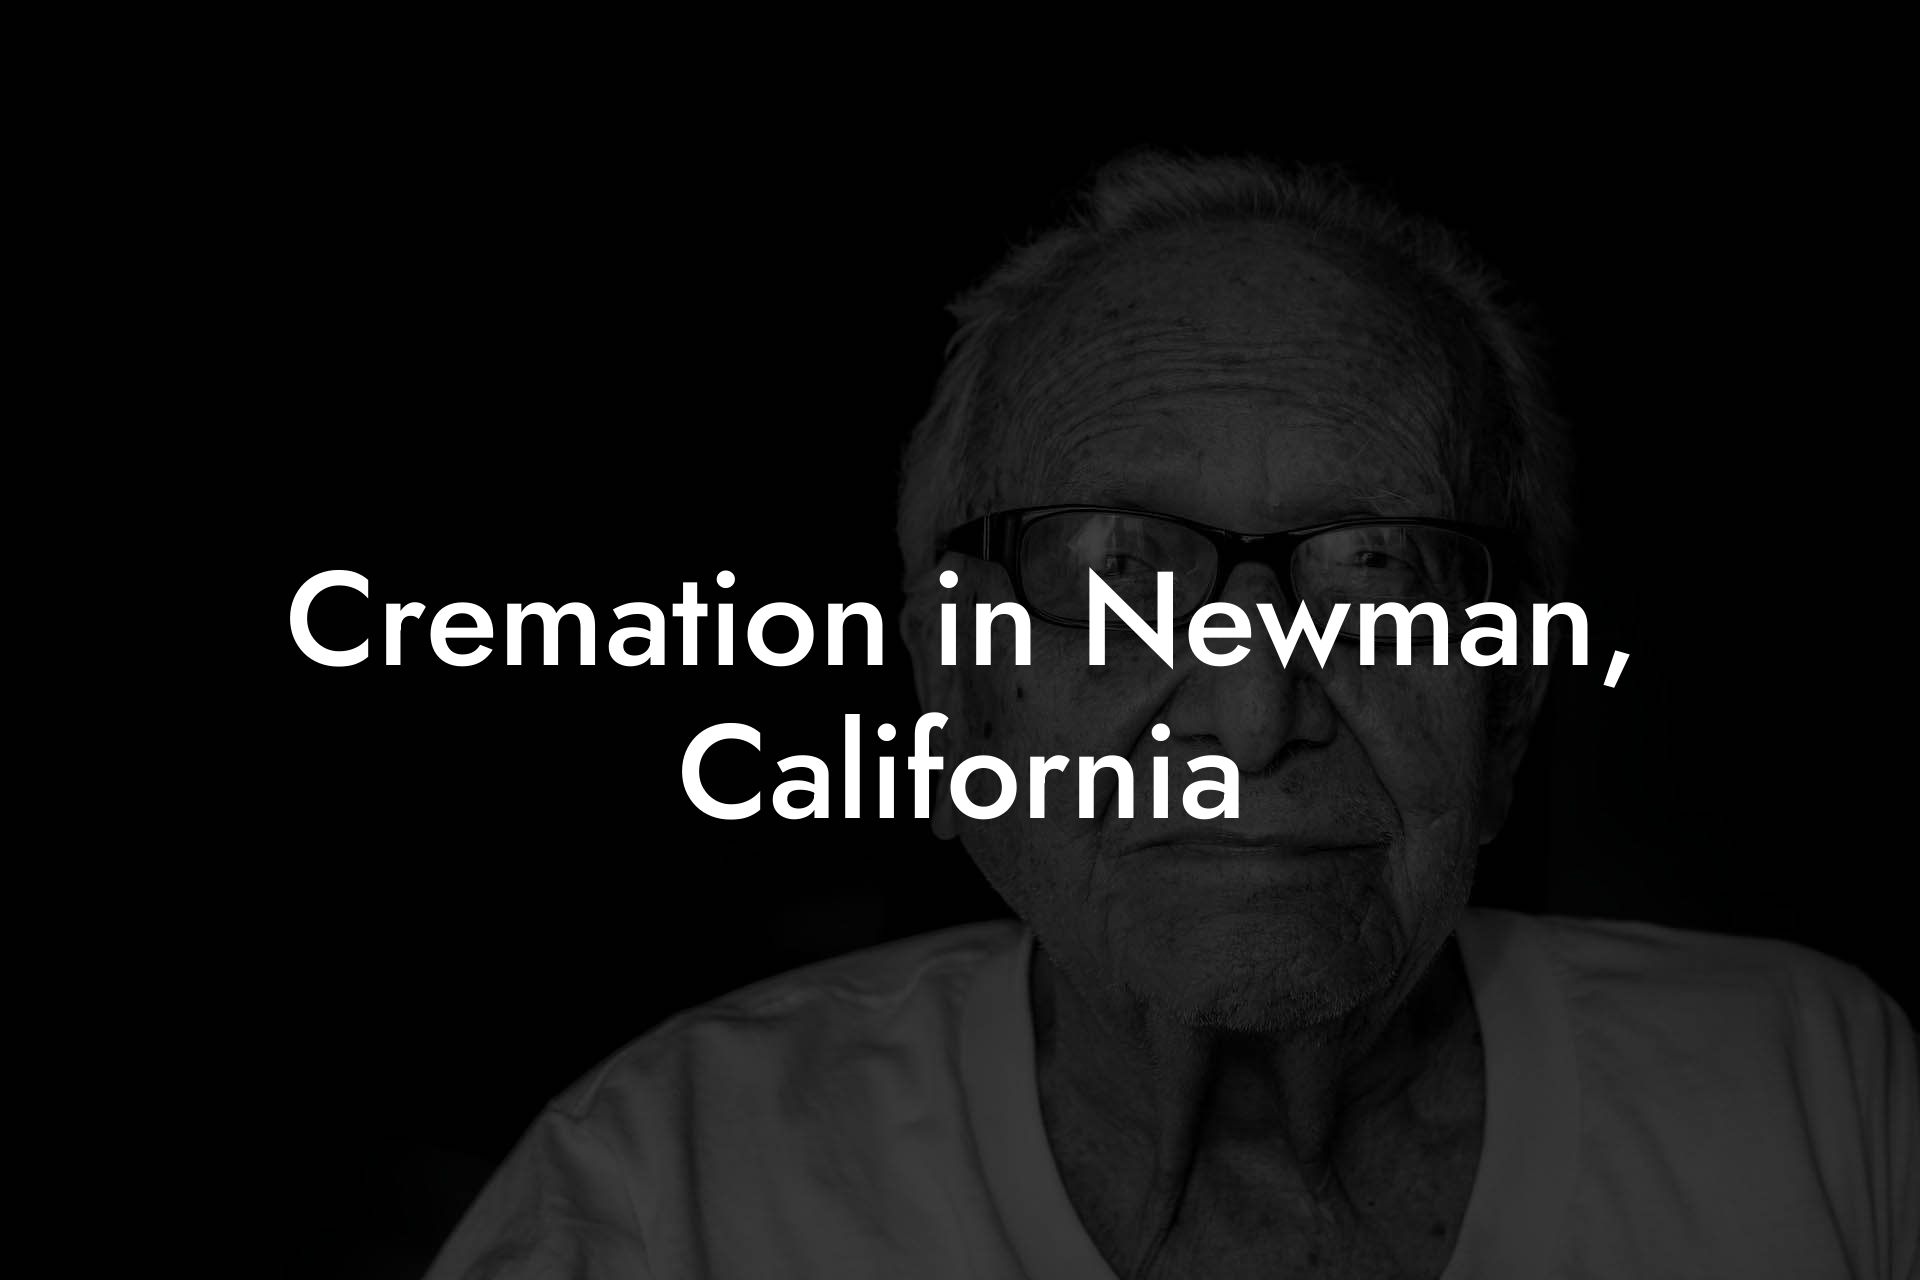 Cremation in Newman, California